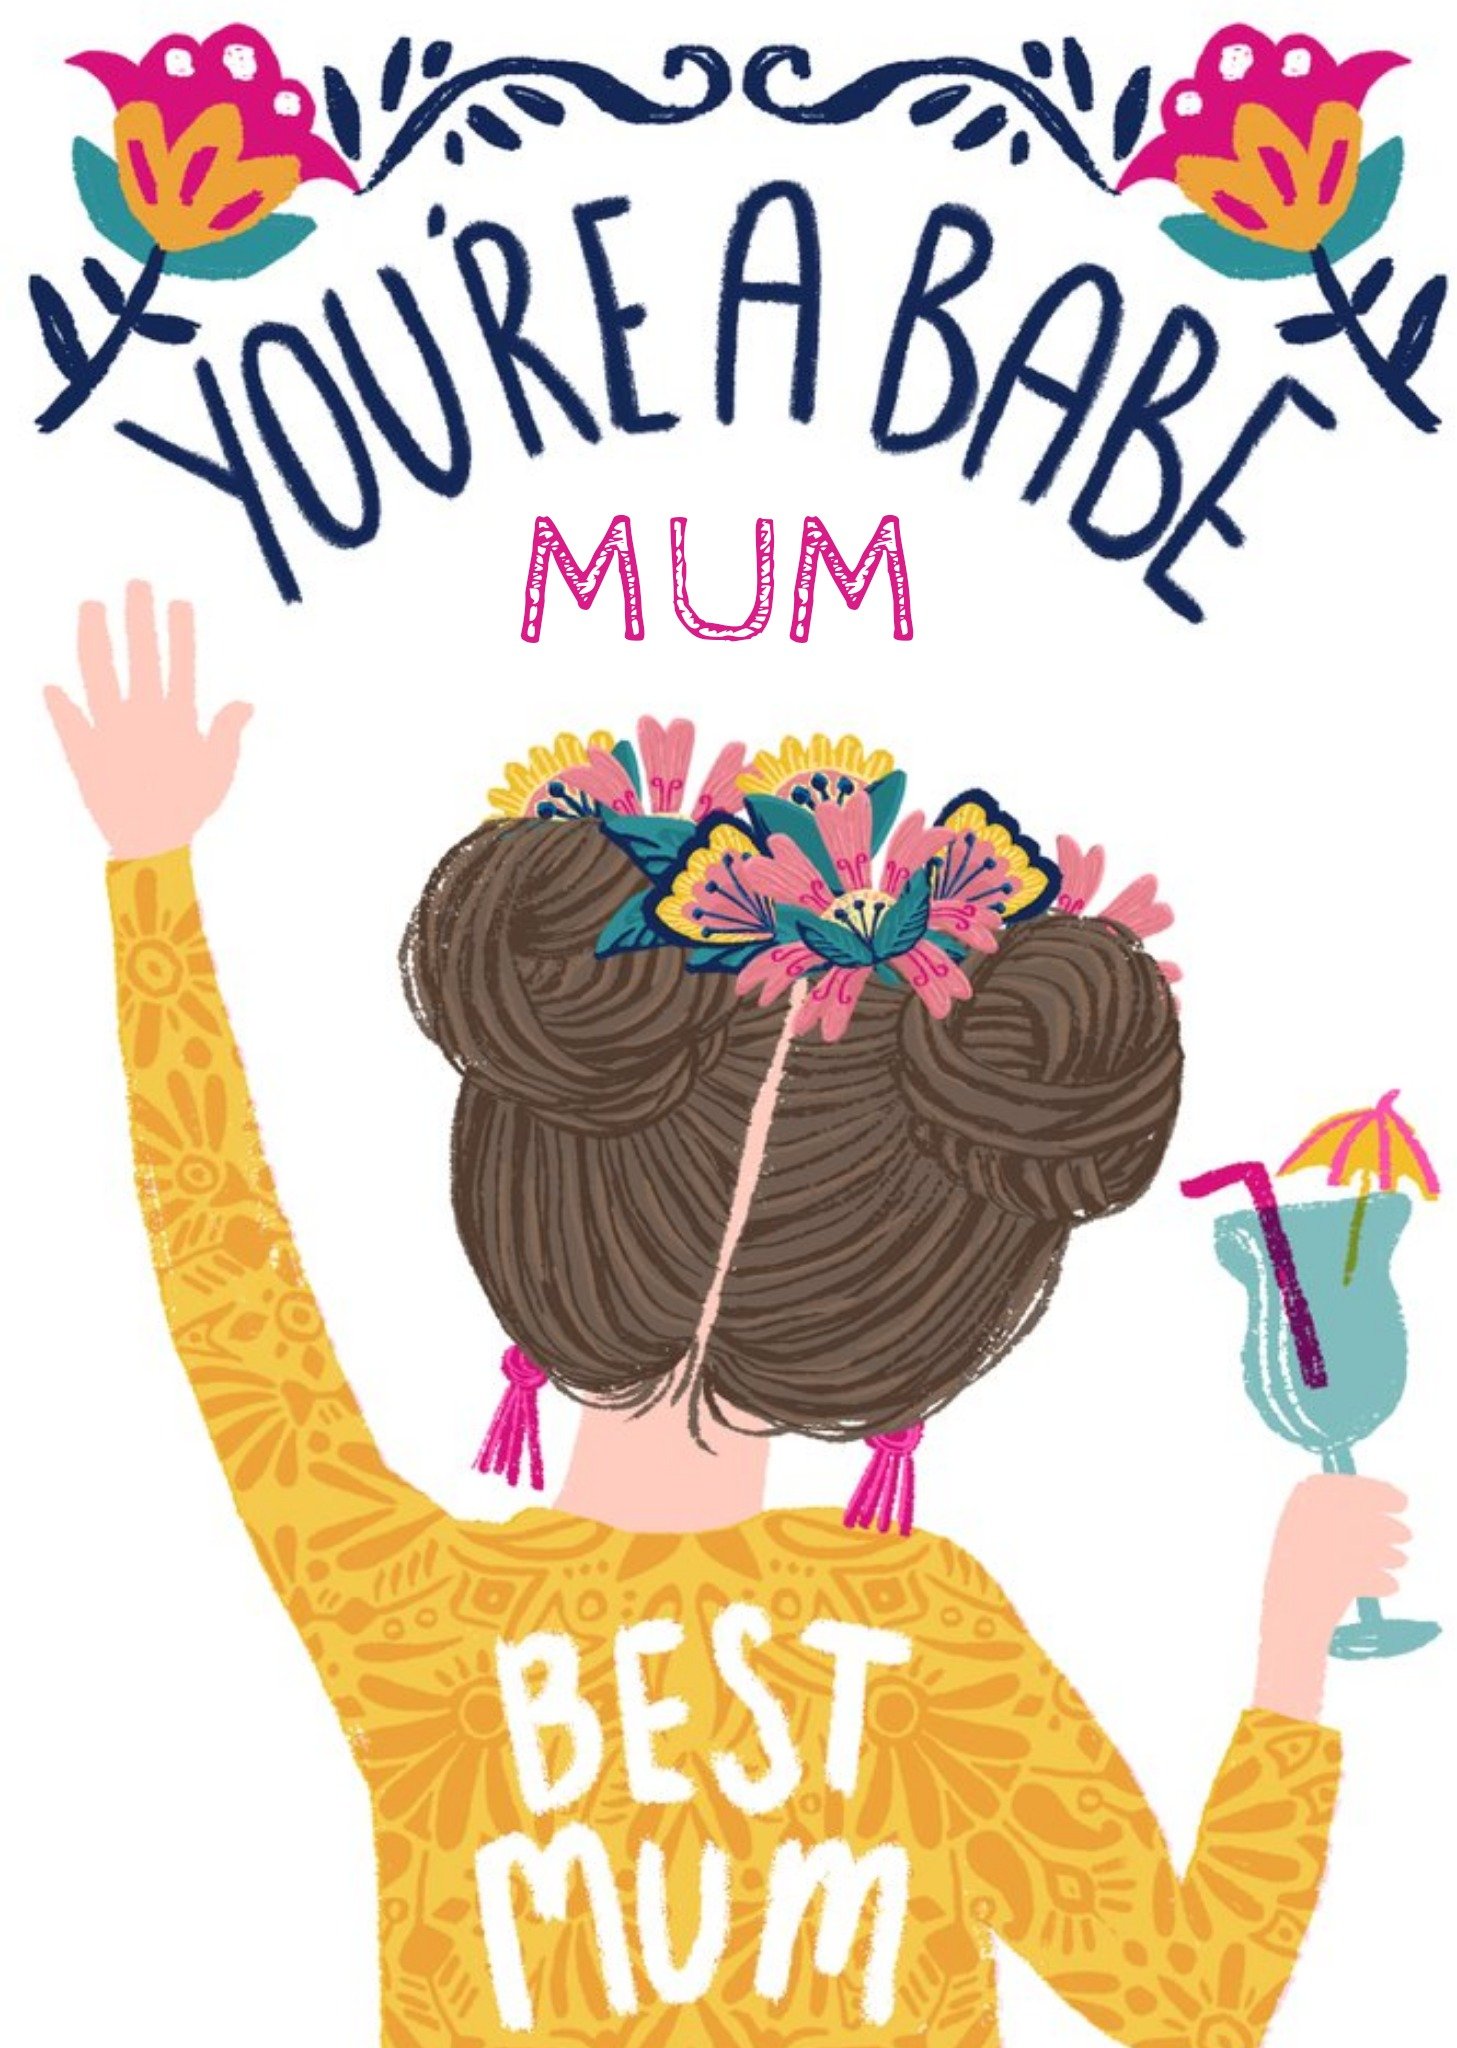 Moonpig Colourful You're A Babe Mum Mother's Day Card Ecard